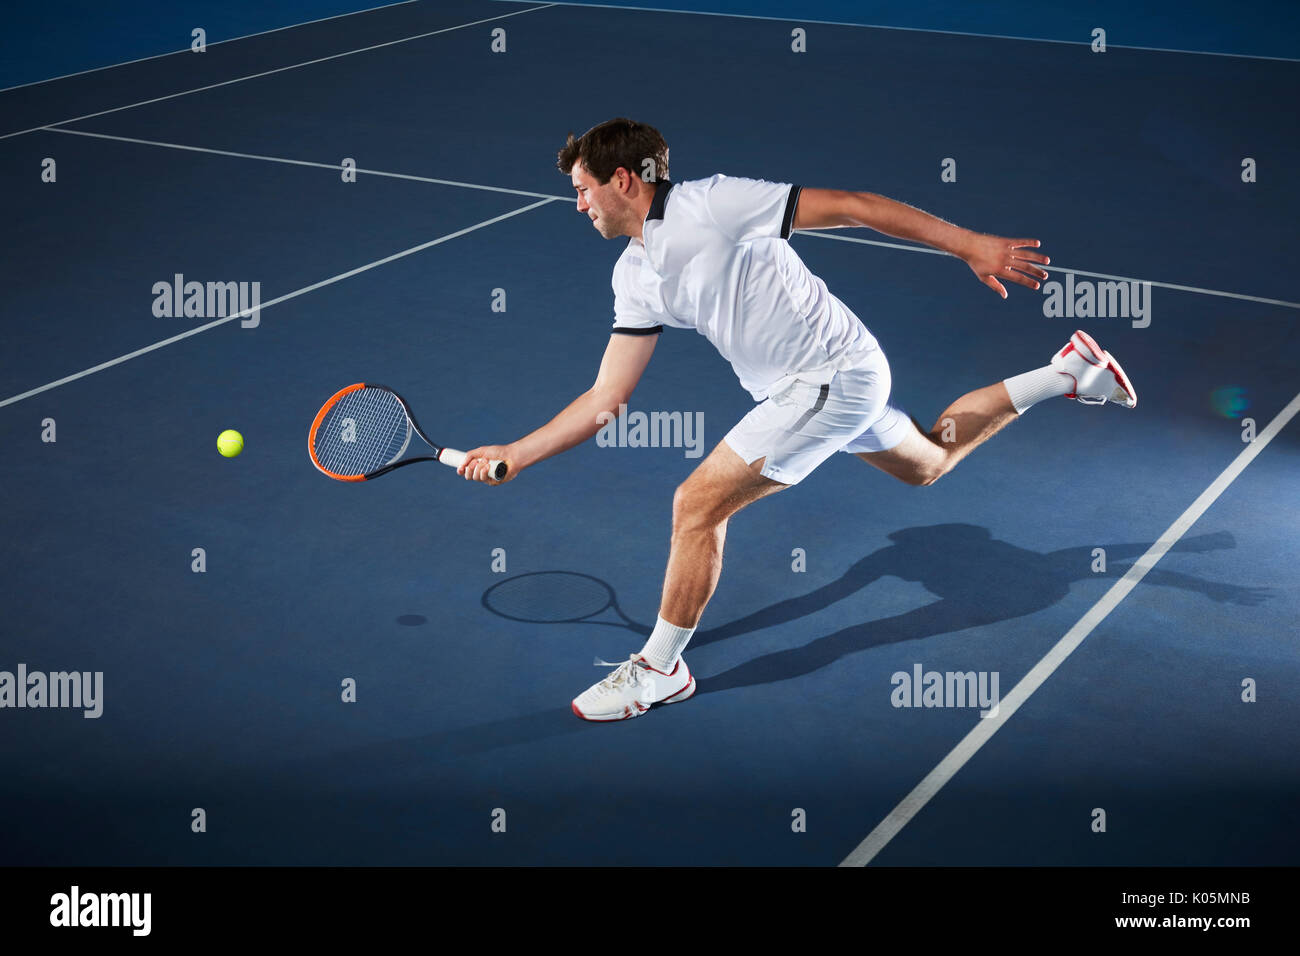 Male tennis player playing tennis, reaching with tennis racket on tennis court Stock Photo